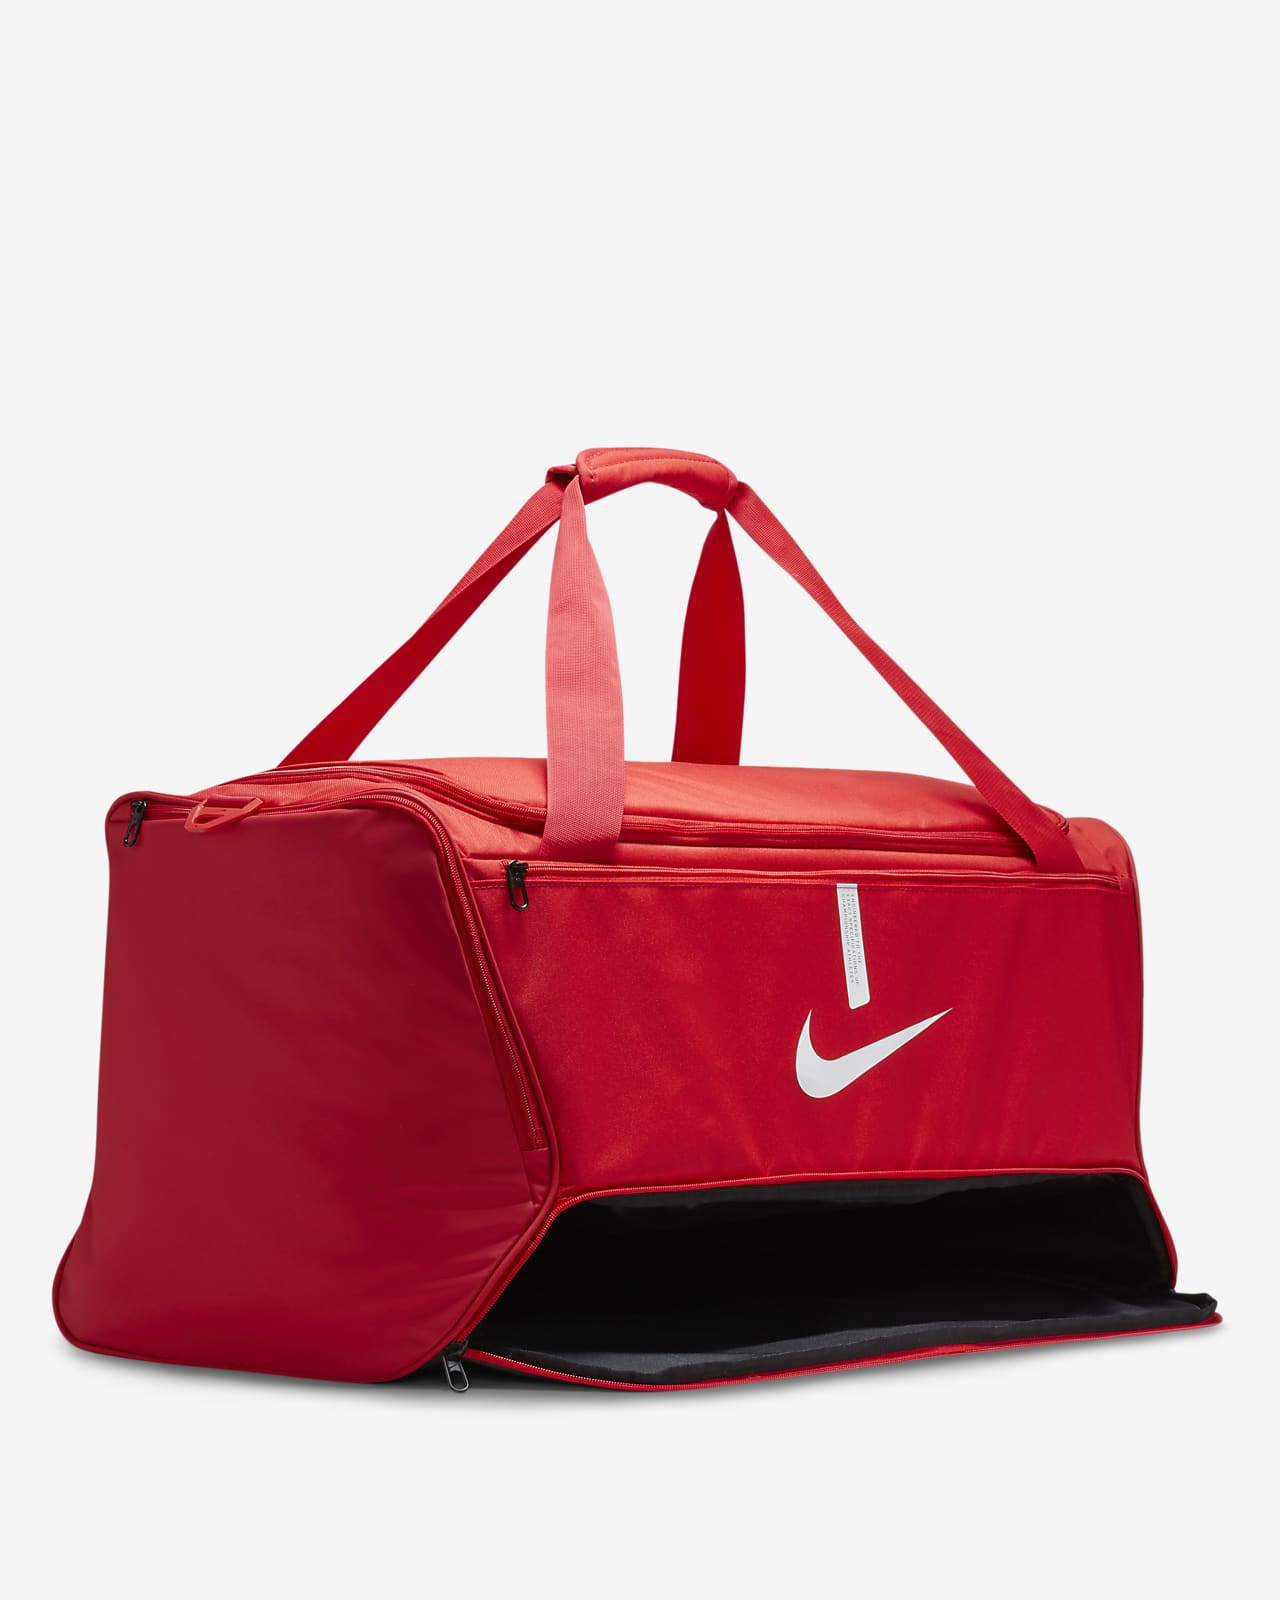 Nike Red Backpack Light Weight | eBay